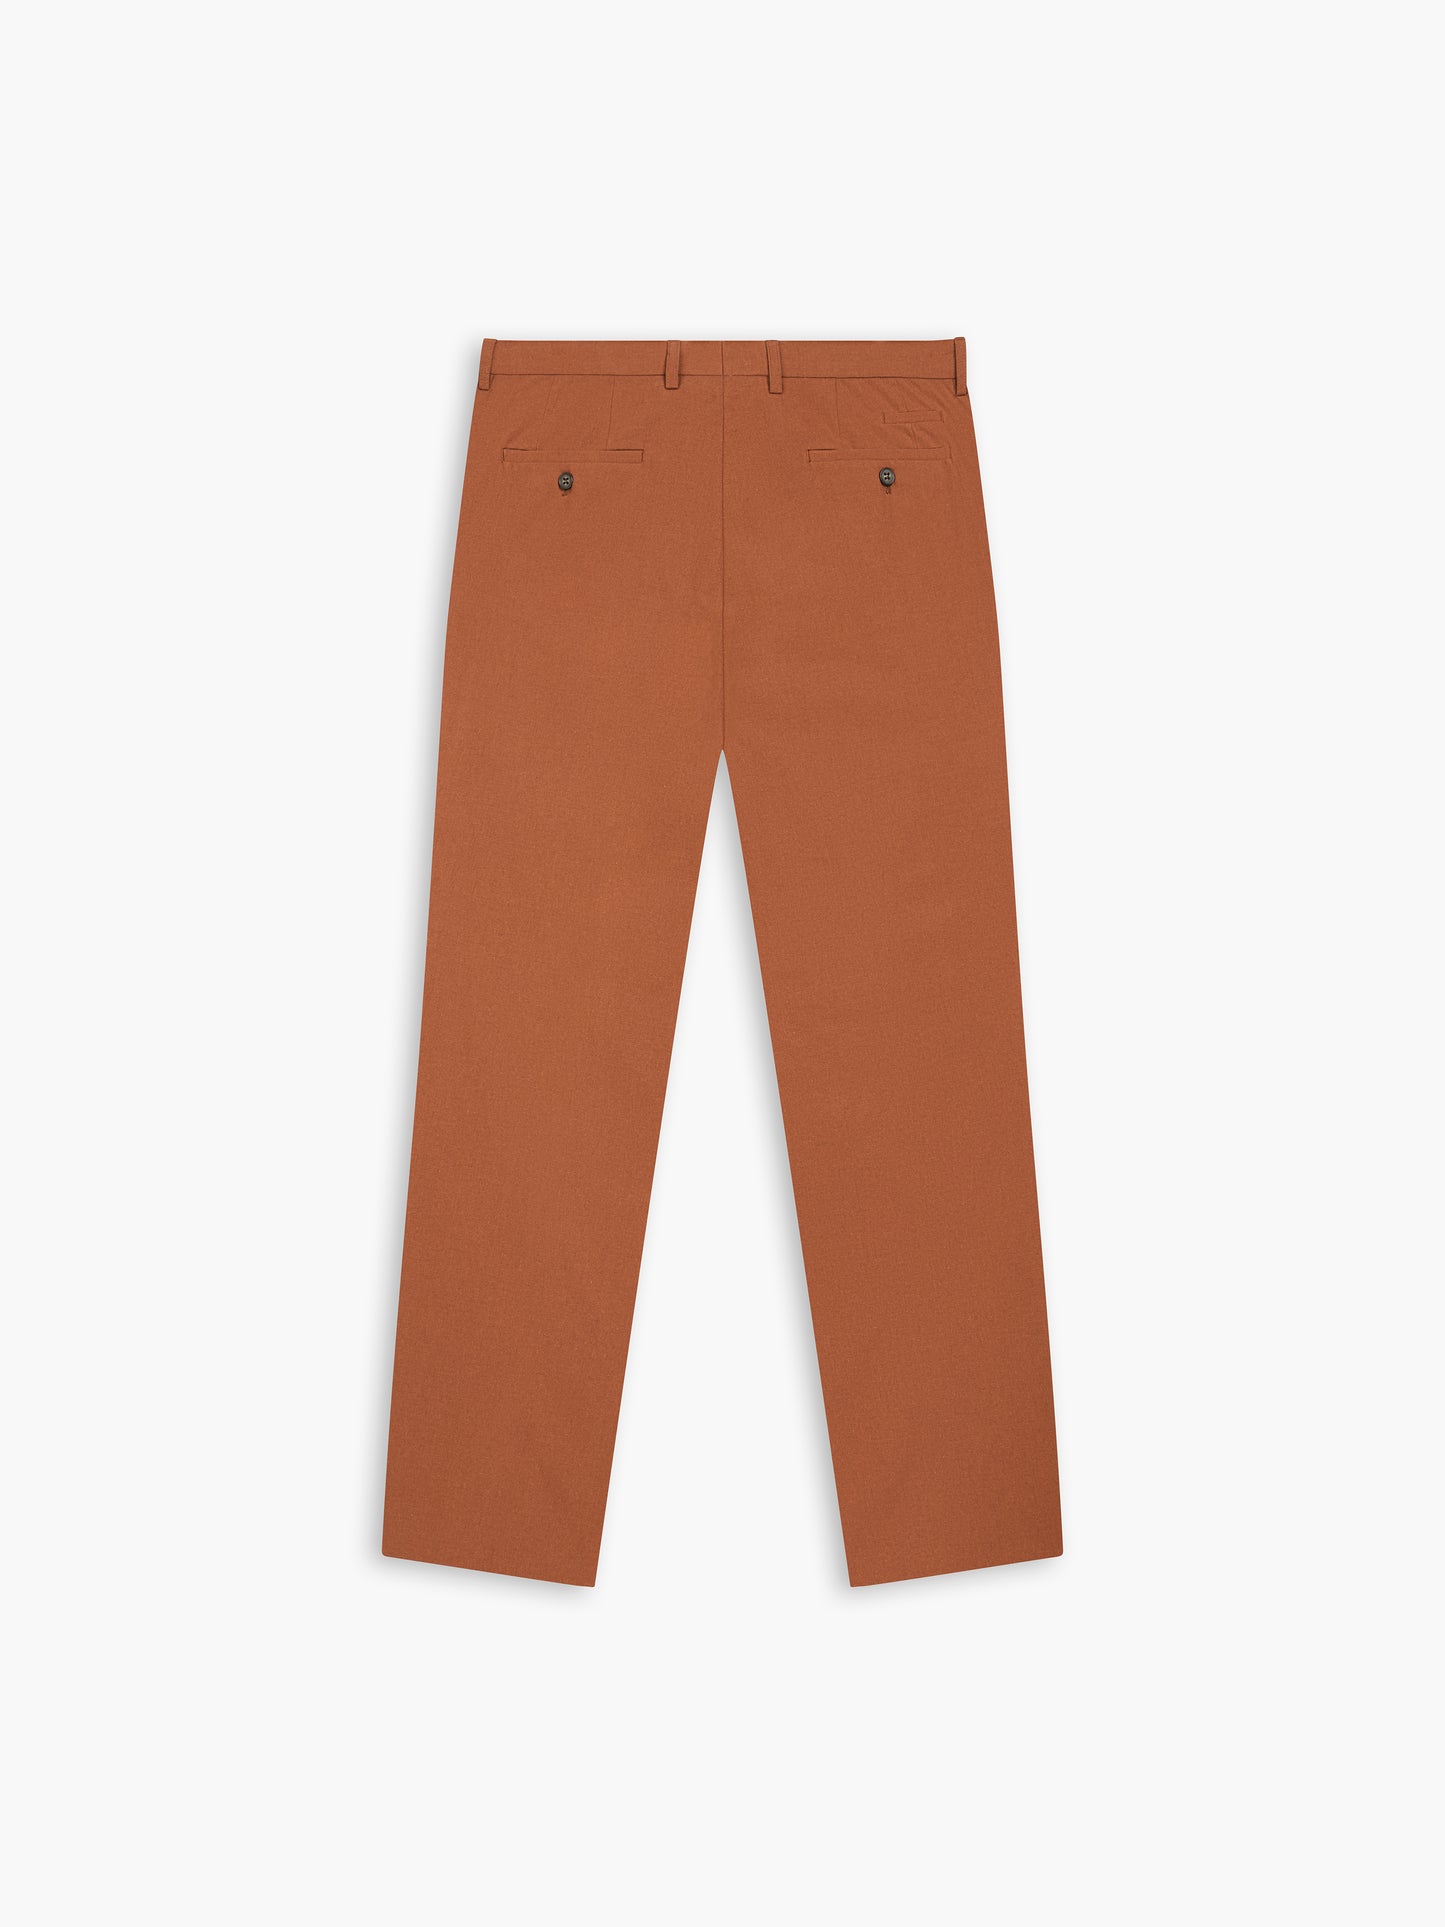 Piccadilly Linen Slim Rust Suit Trouser